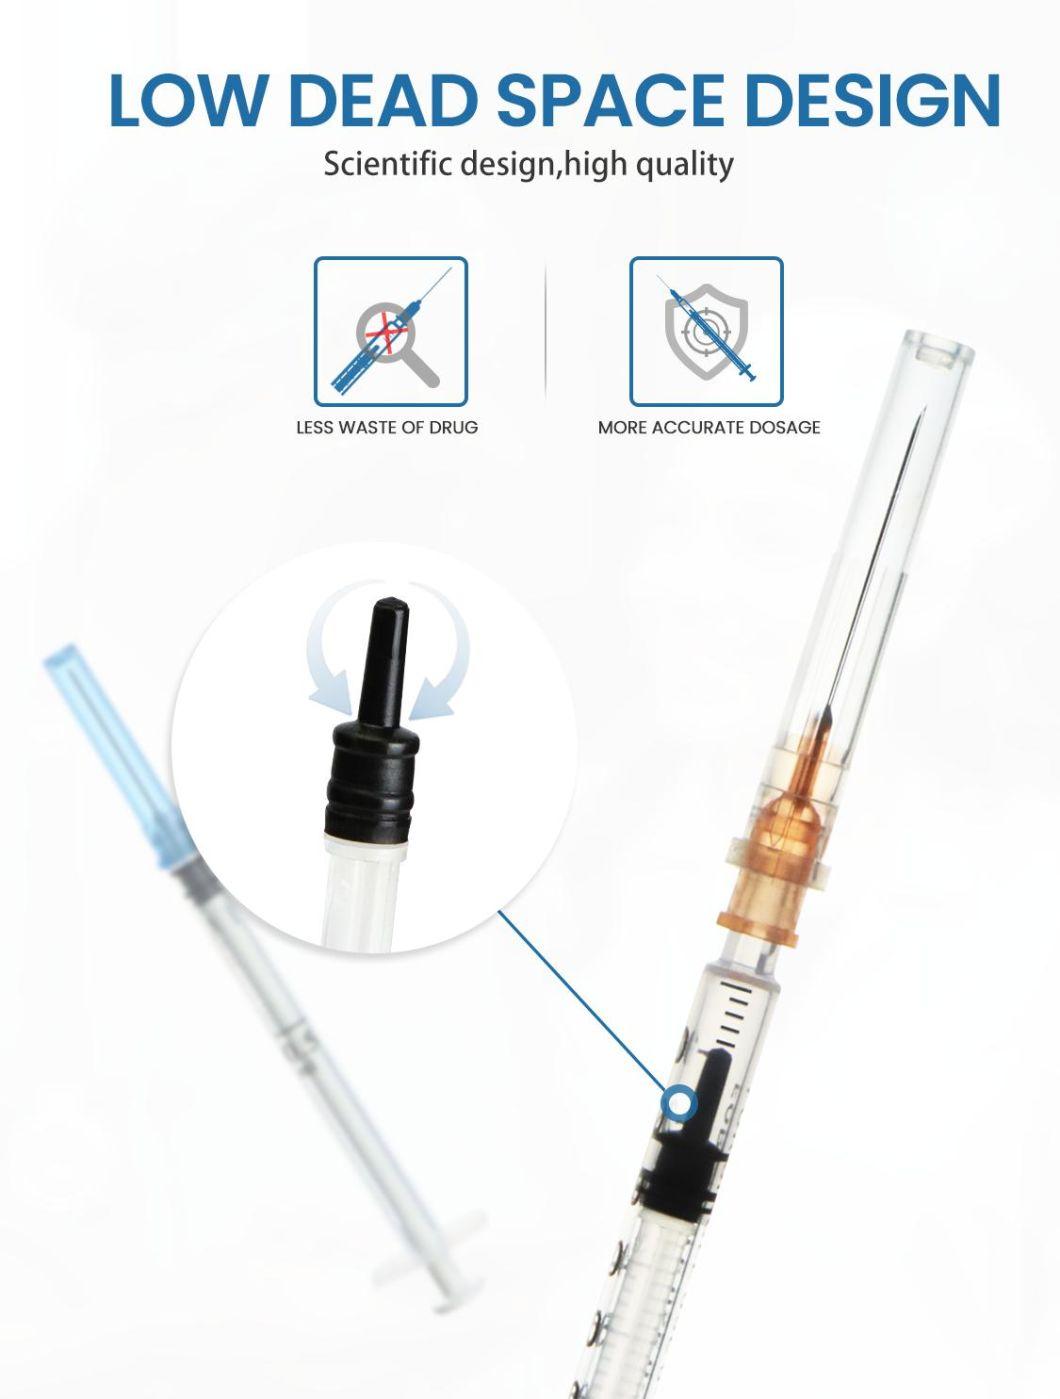 1/3/5/10/20/30/50/60ml Disposable Syringe for Injection Luer Lock/Slip with Needle